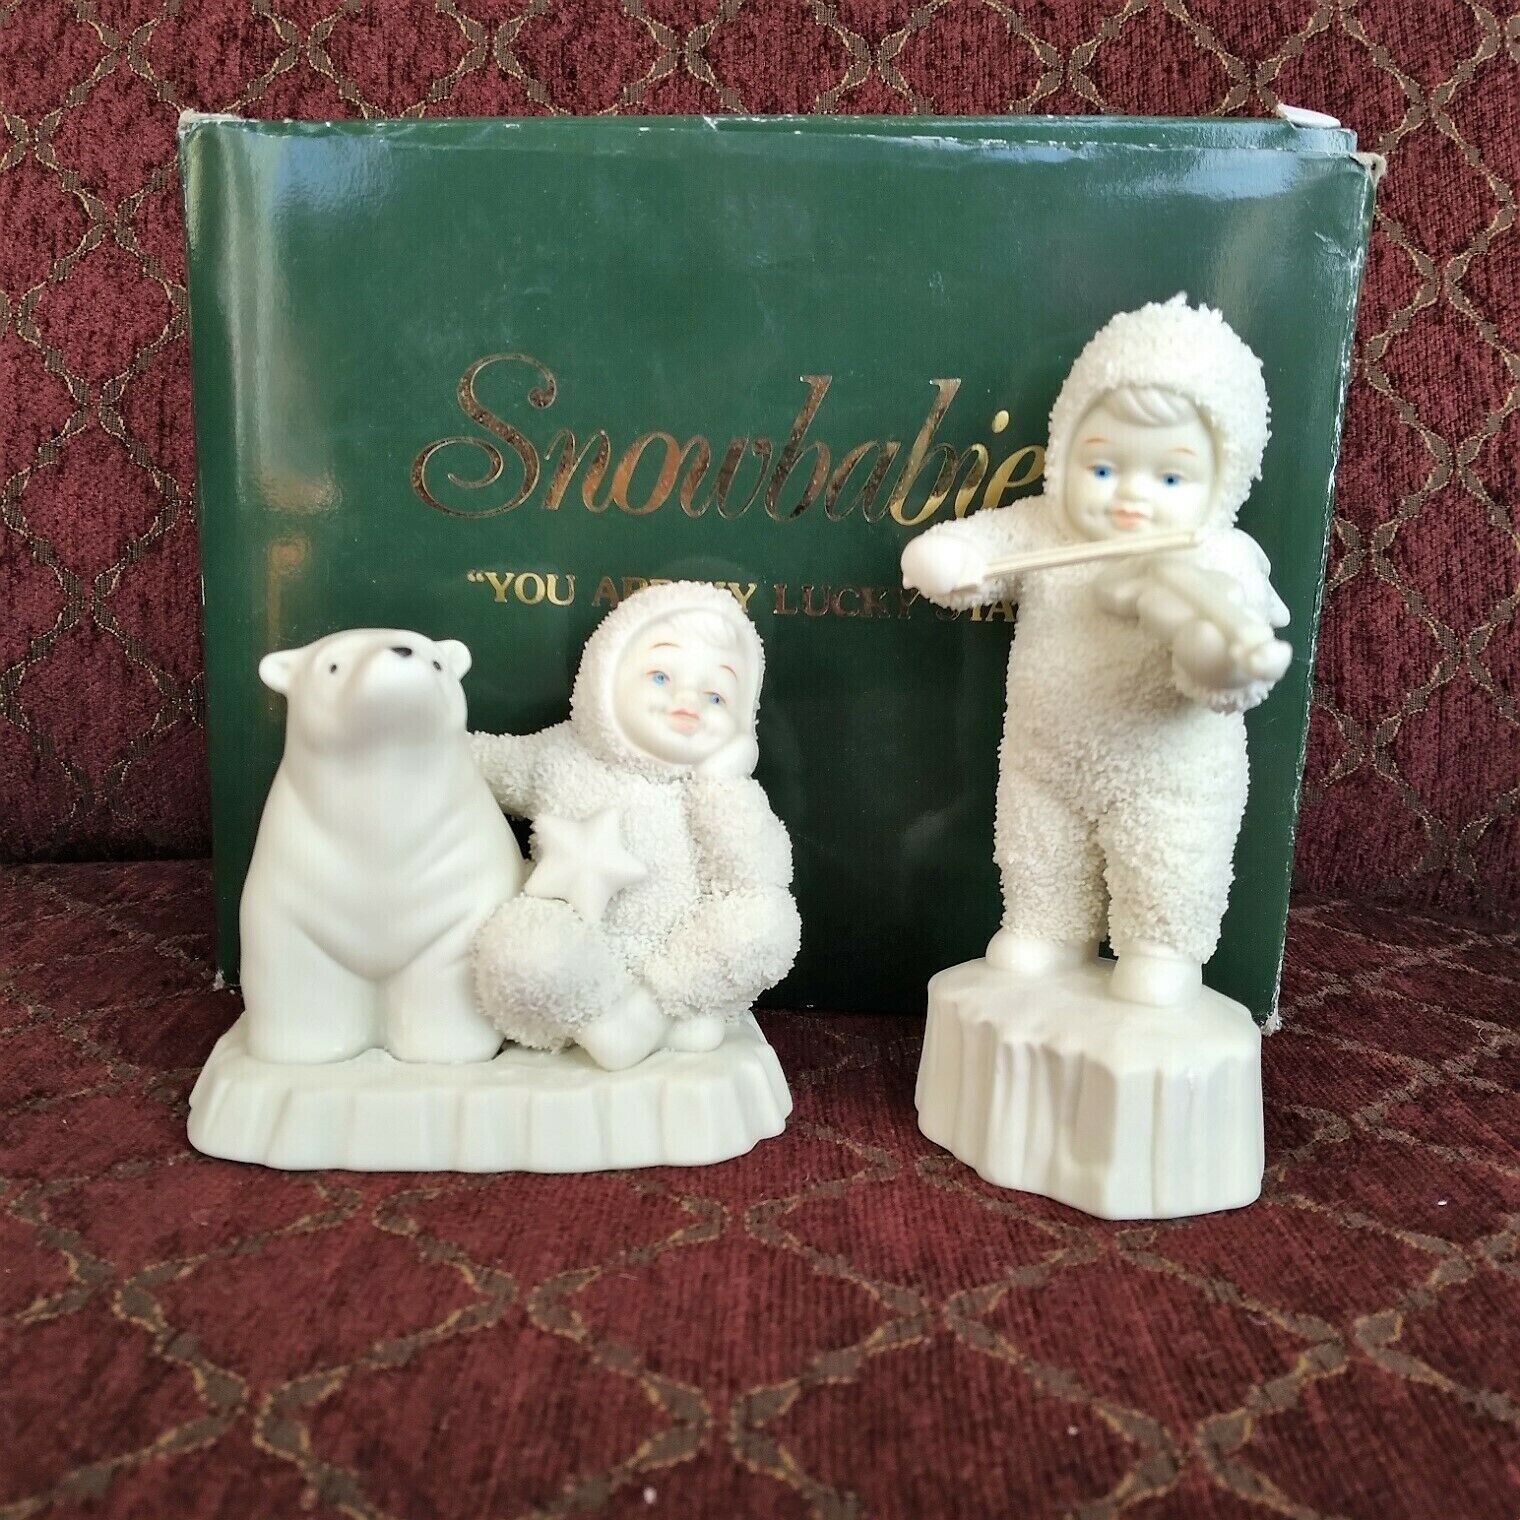 Snowbabies by Department 56 68814 You Are My Lucky Star in Original Box - $28.49